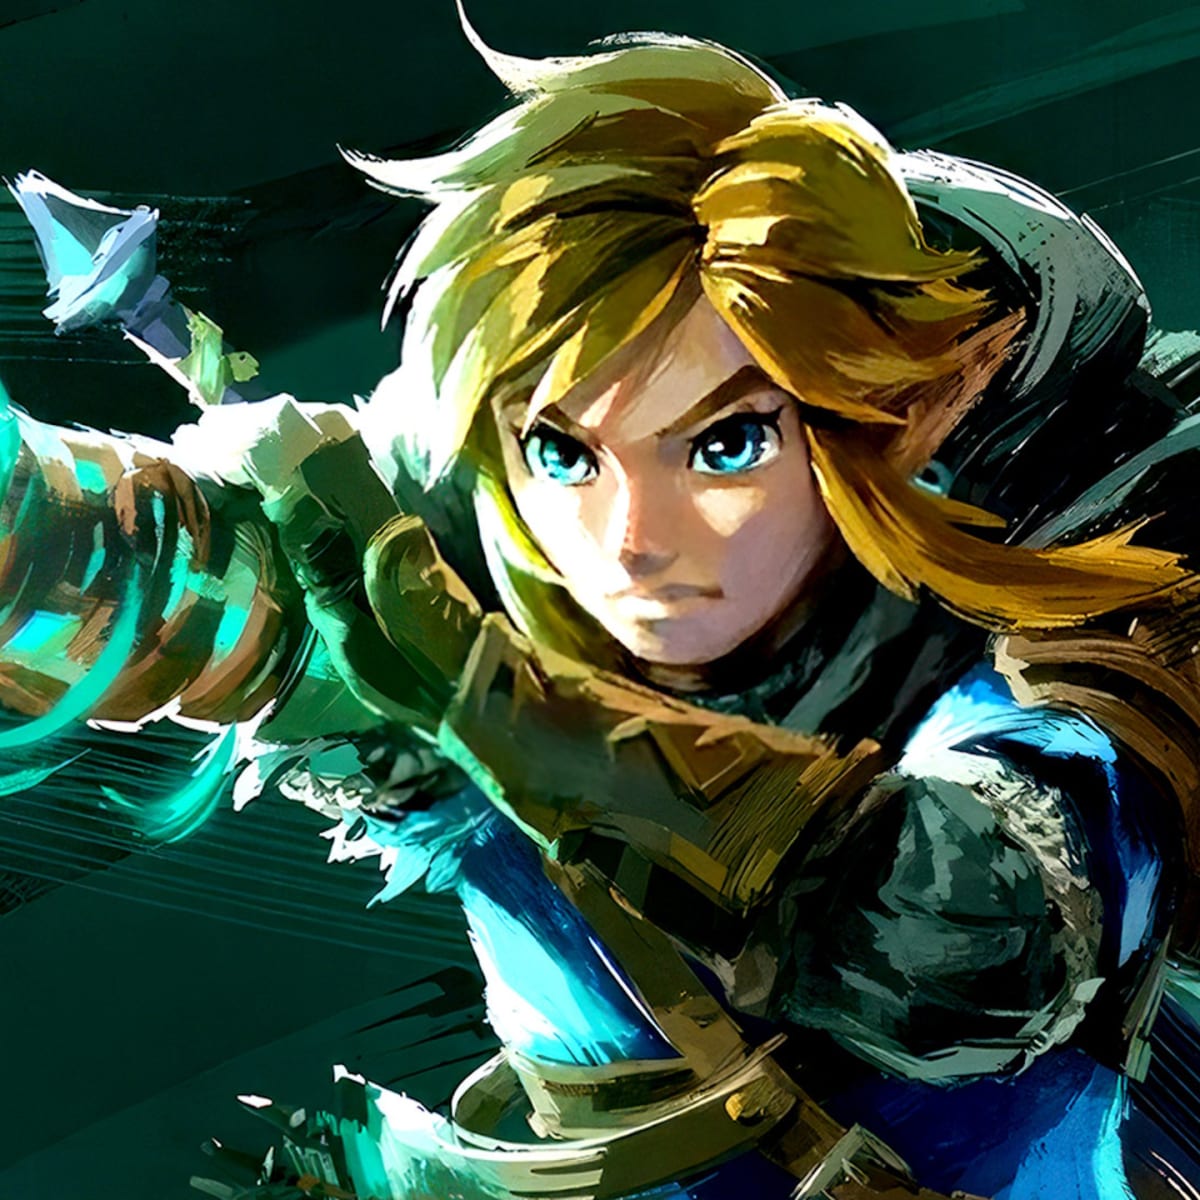 Nintendo and Sony is making a live-action 'The Legend of Zelda